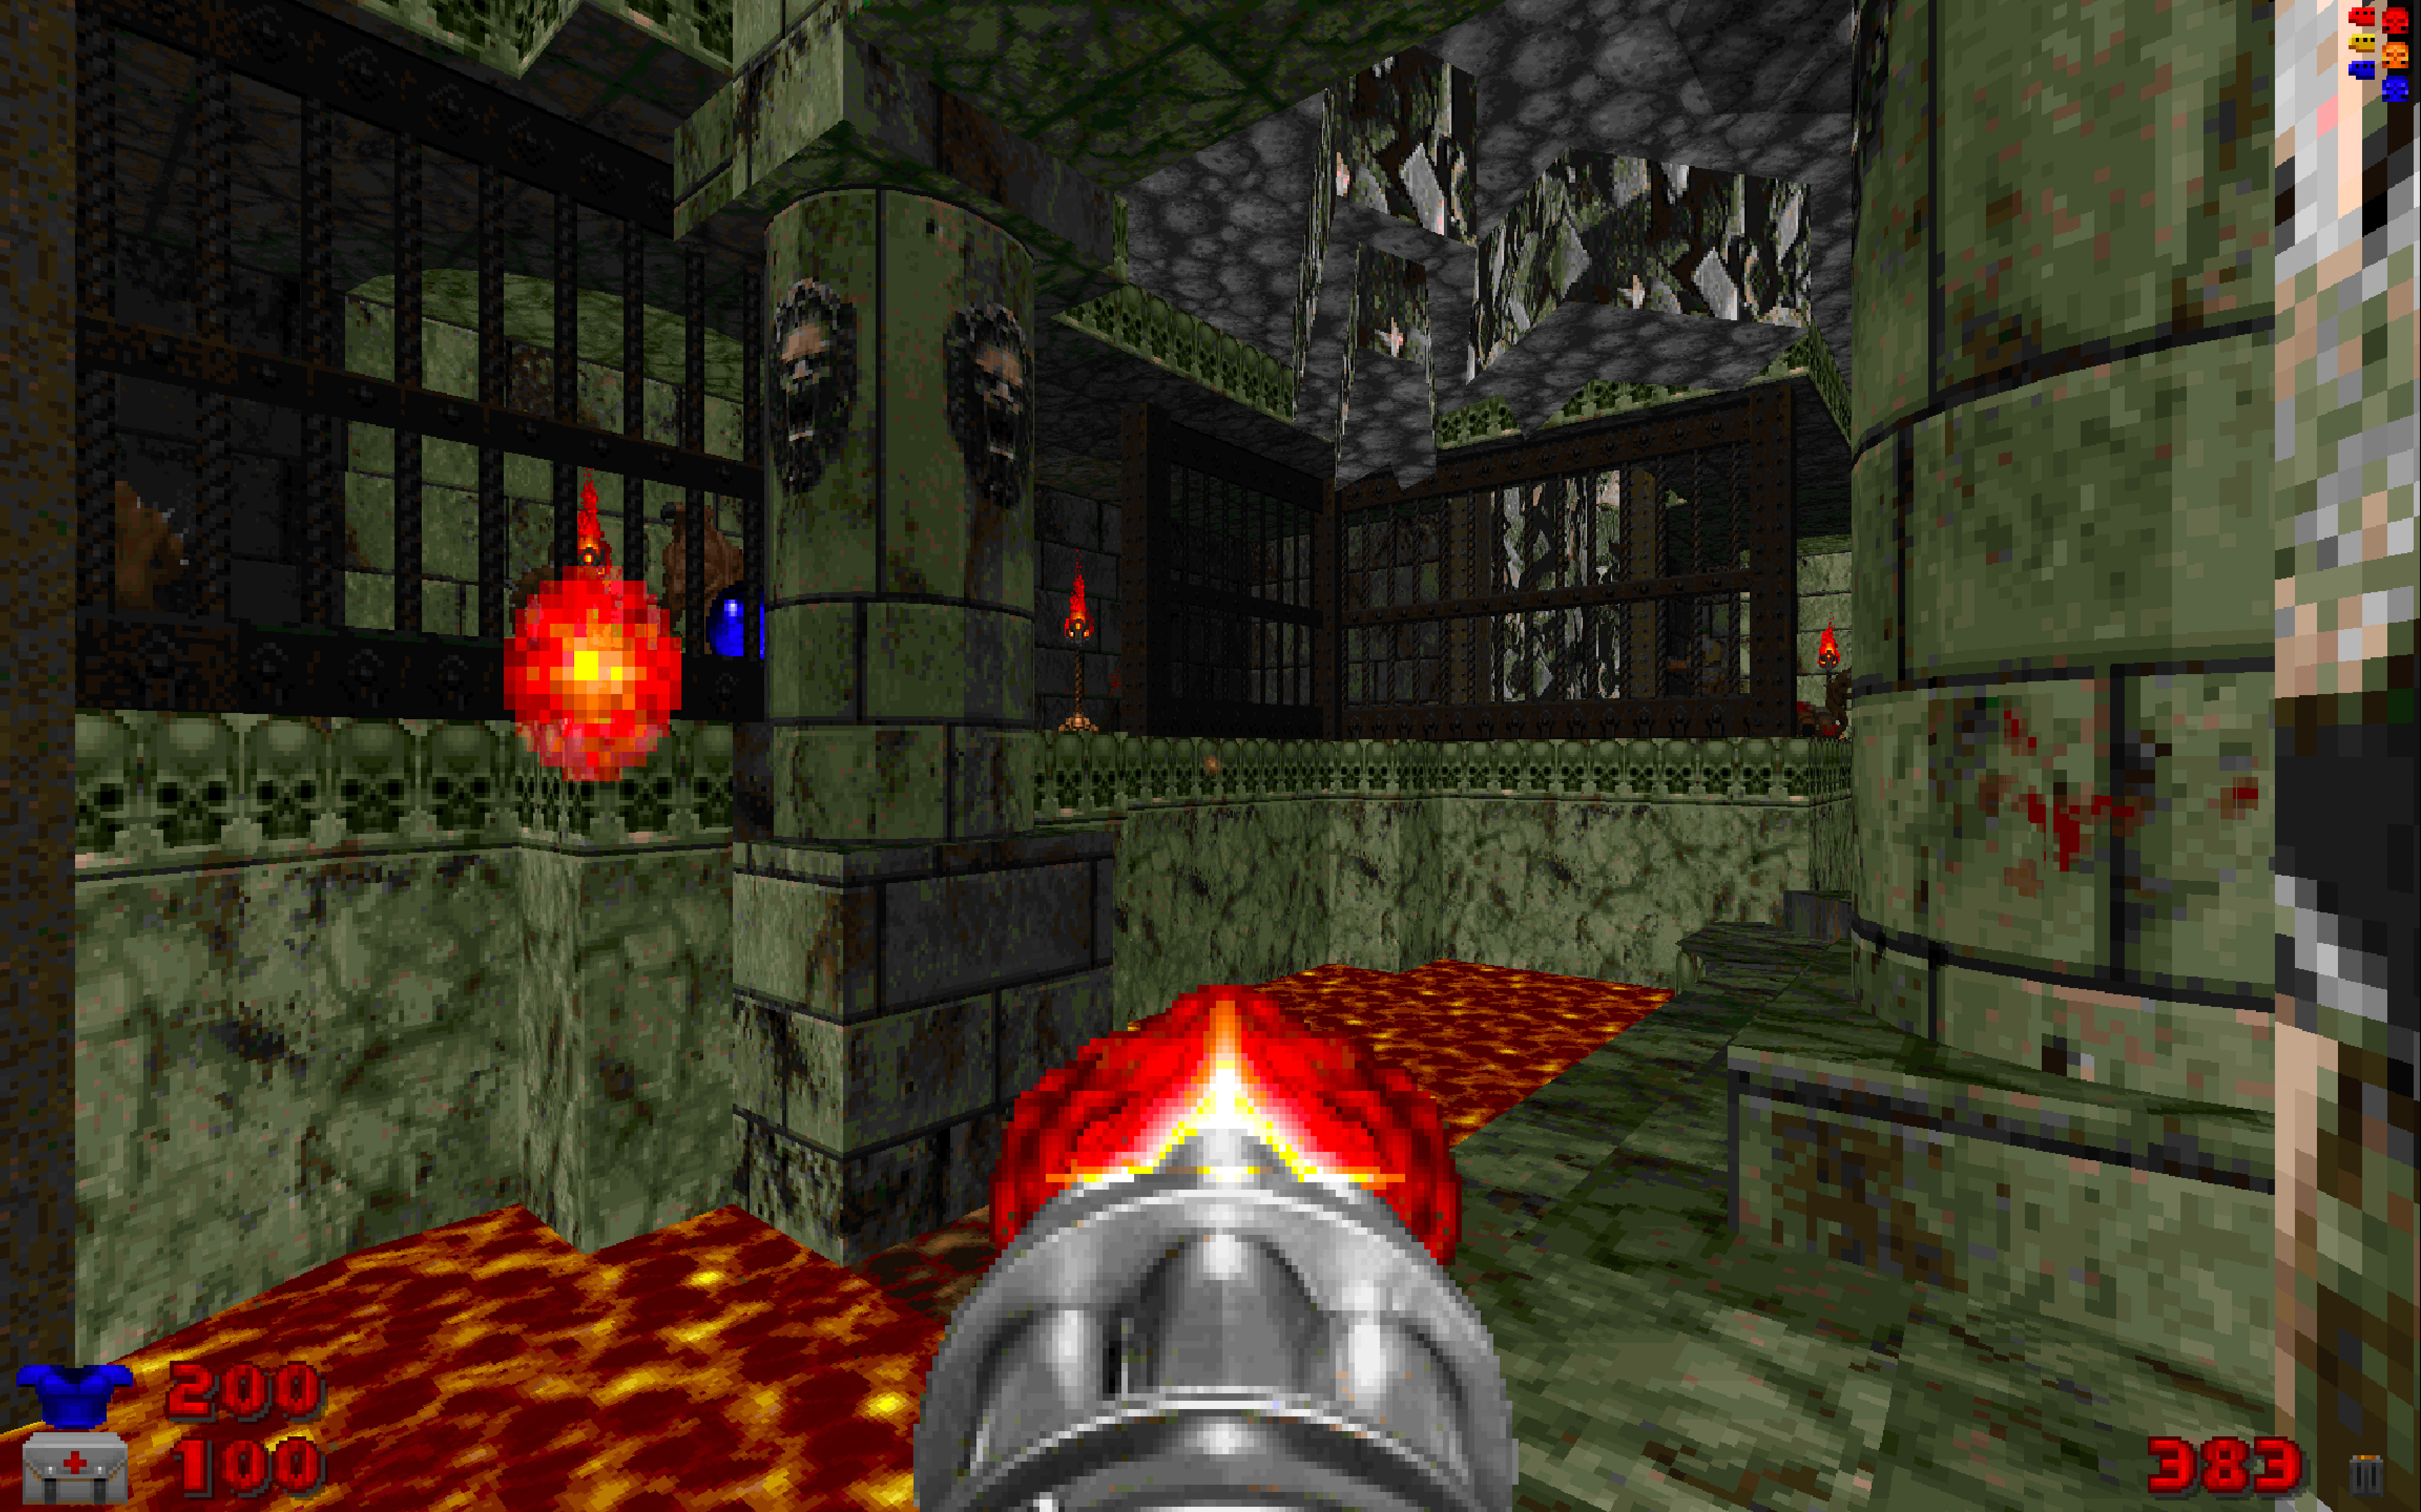 Sigil II, a brand-new unofficial 6th episode for Doom by John Romero,  coming December 10th